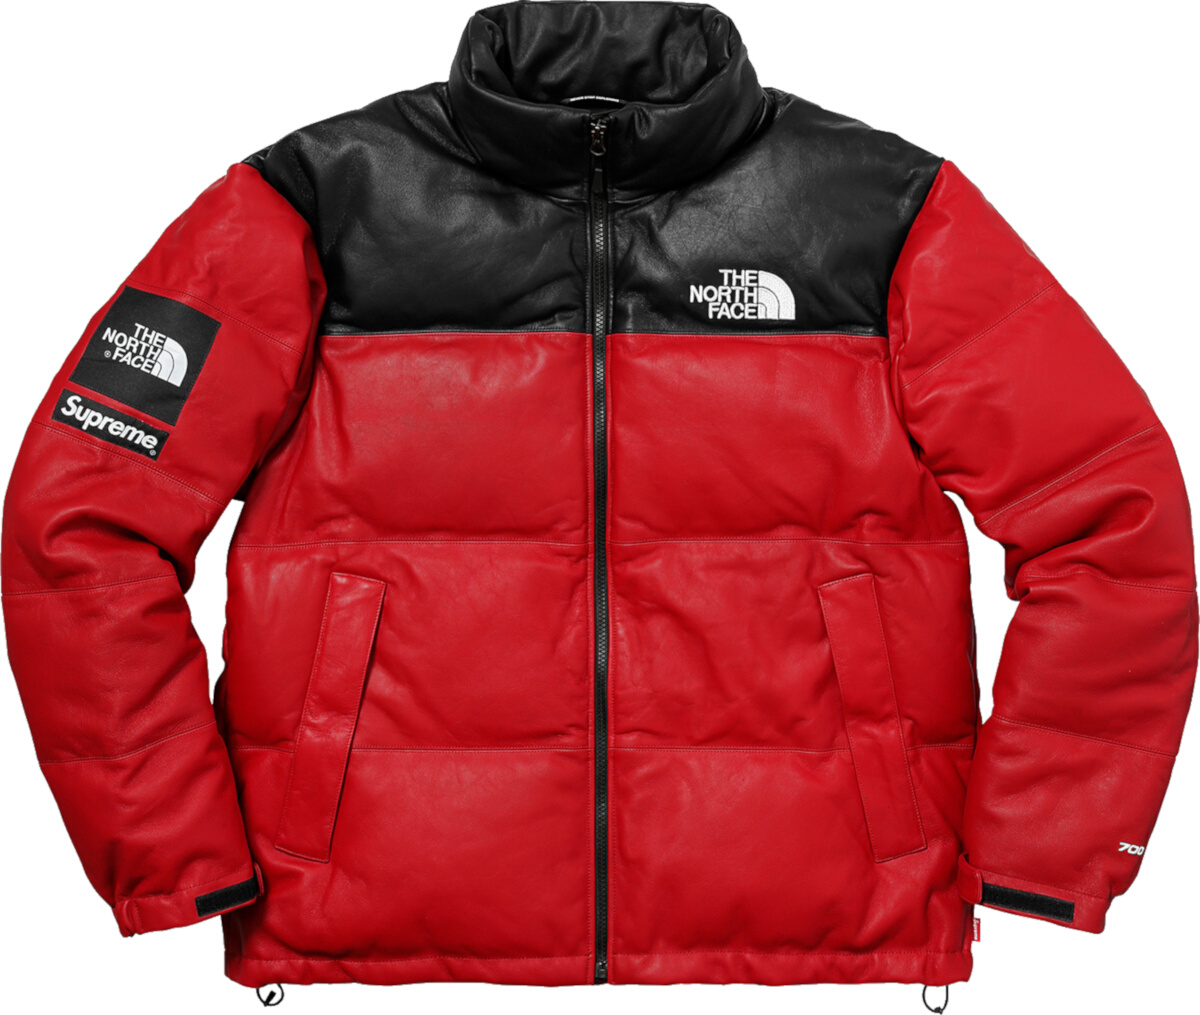 The North Face x Supreme Red Leather 'Nuptse' Jacket | Incorporated Style